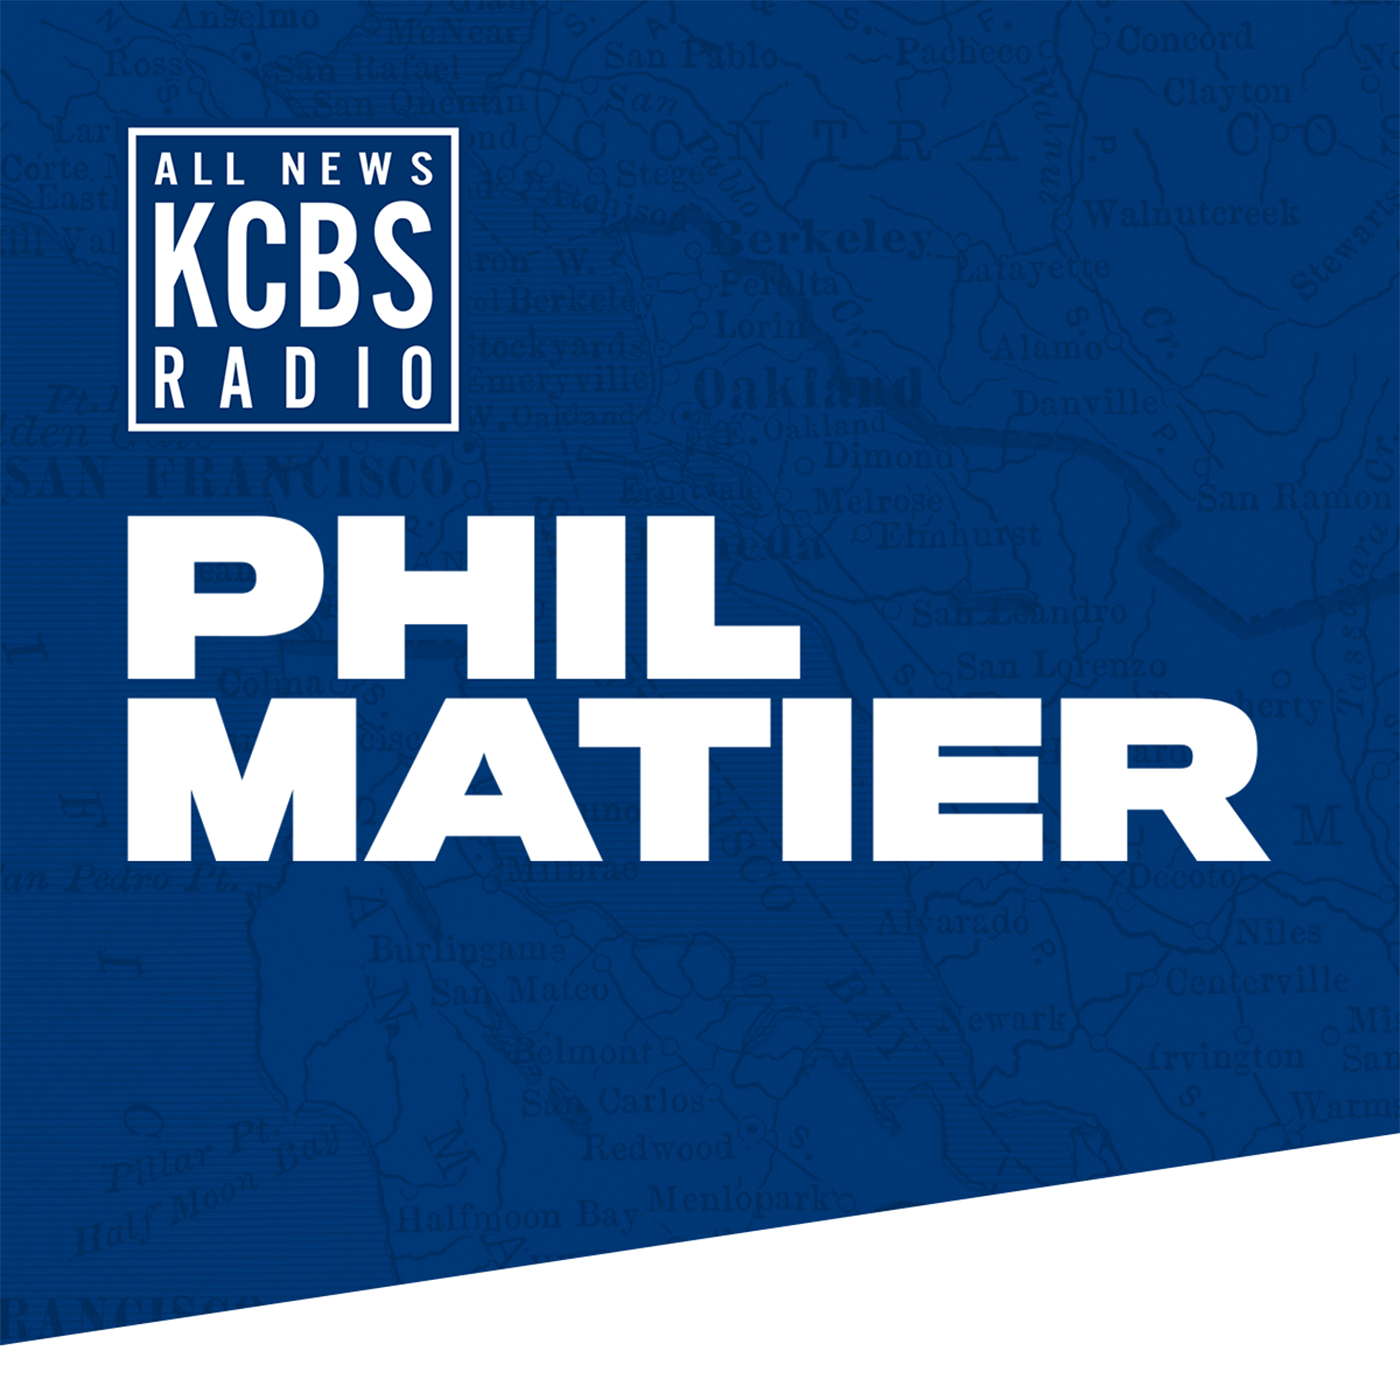 Phil Matier: Some areas of CA favored the recall more than others